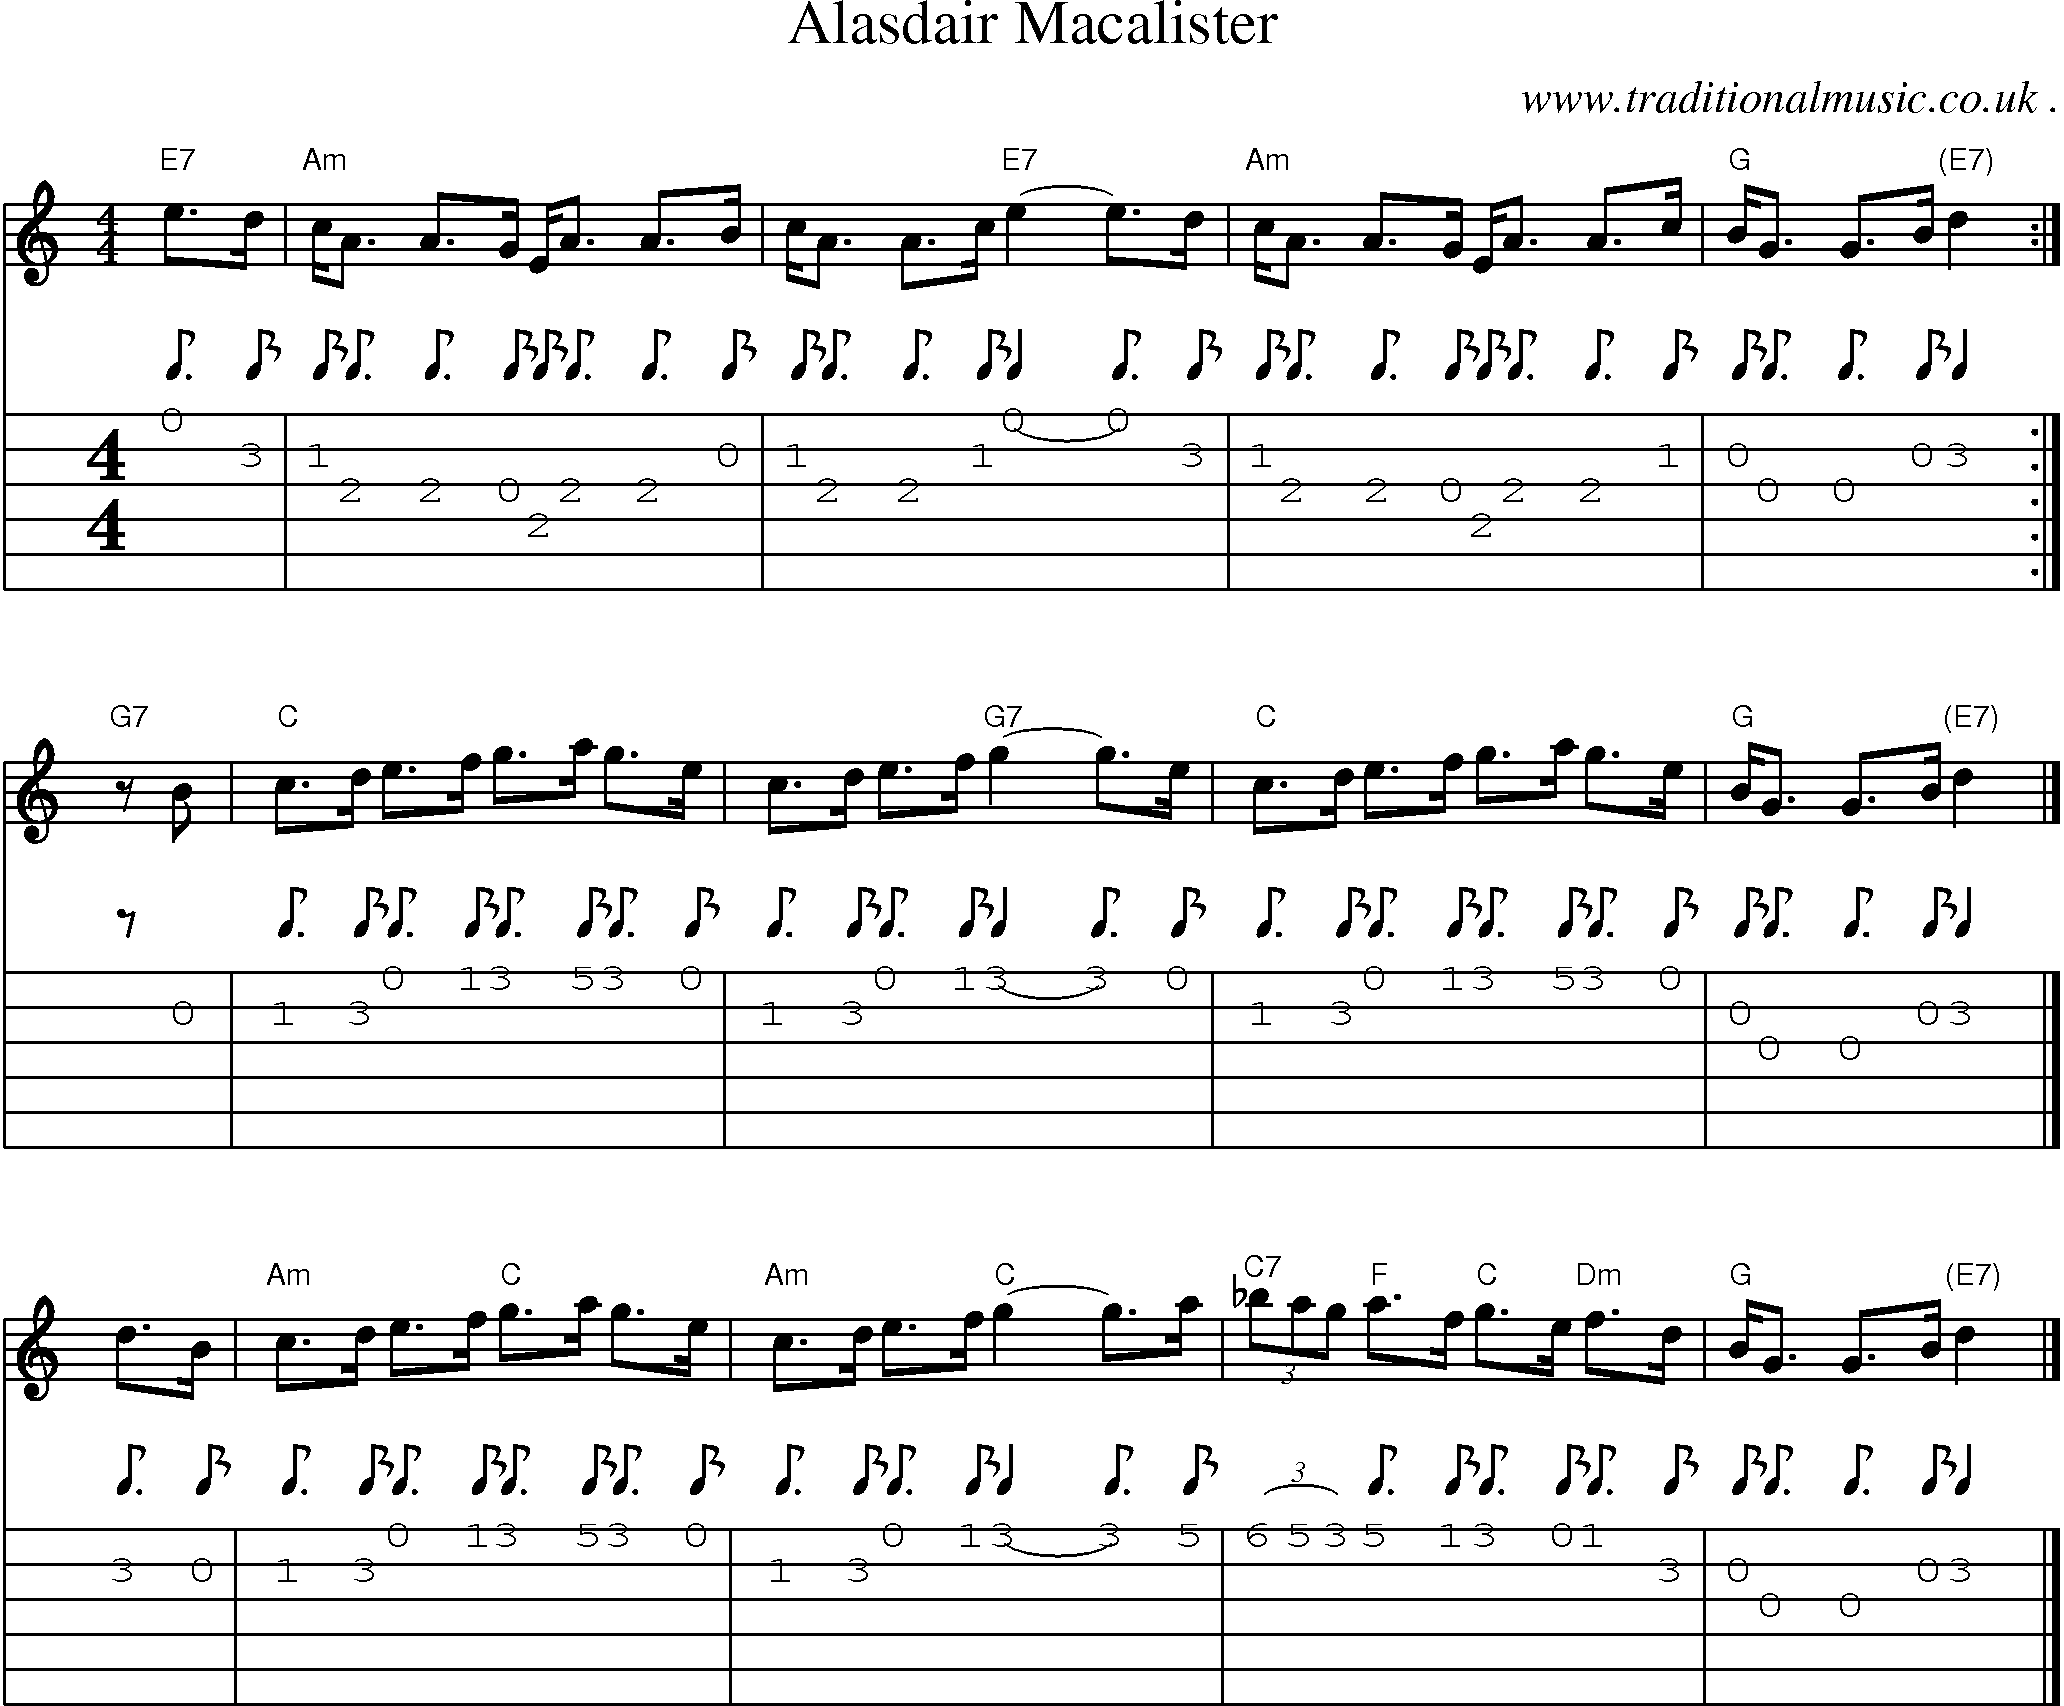 Sheet-music  score, Chords and Guitar Tabs for Alasdair Macalister